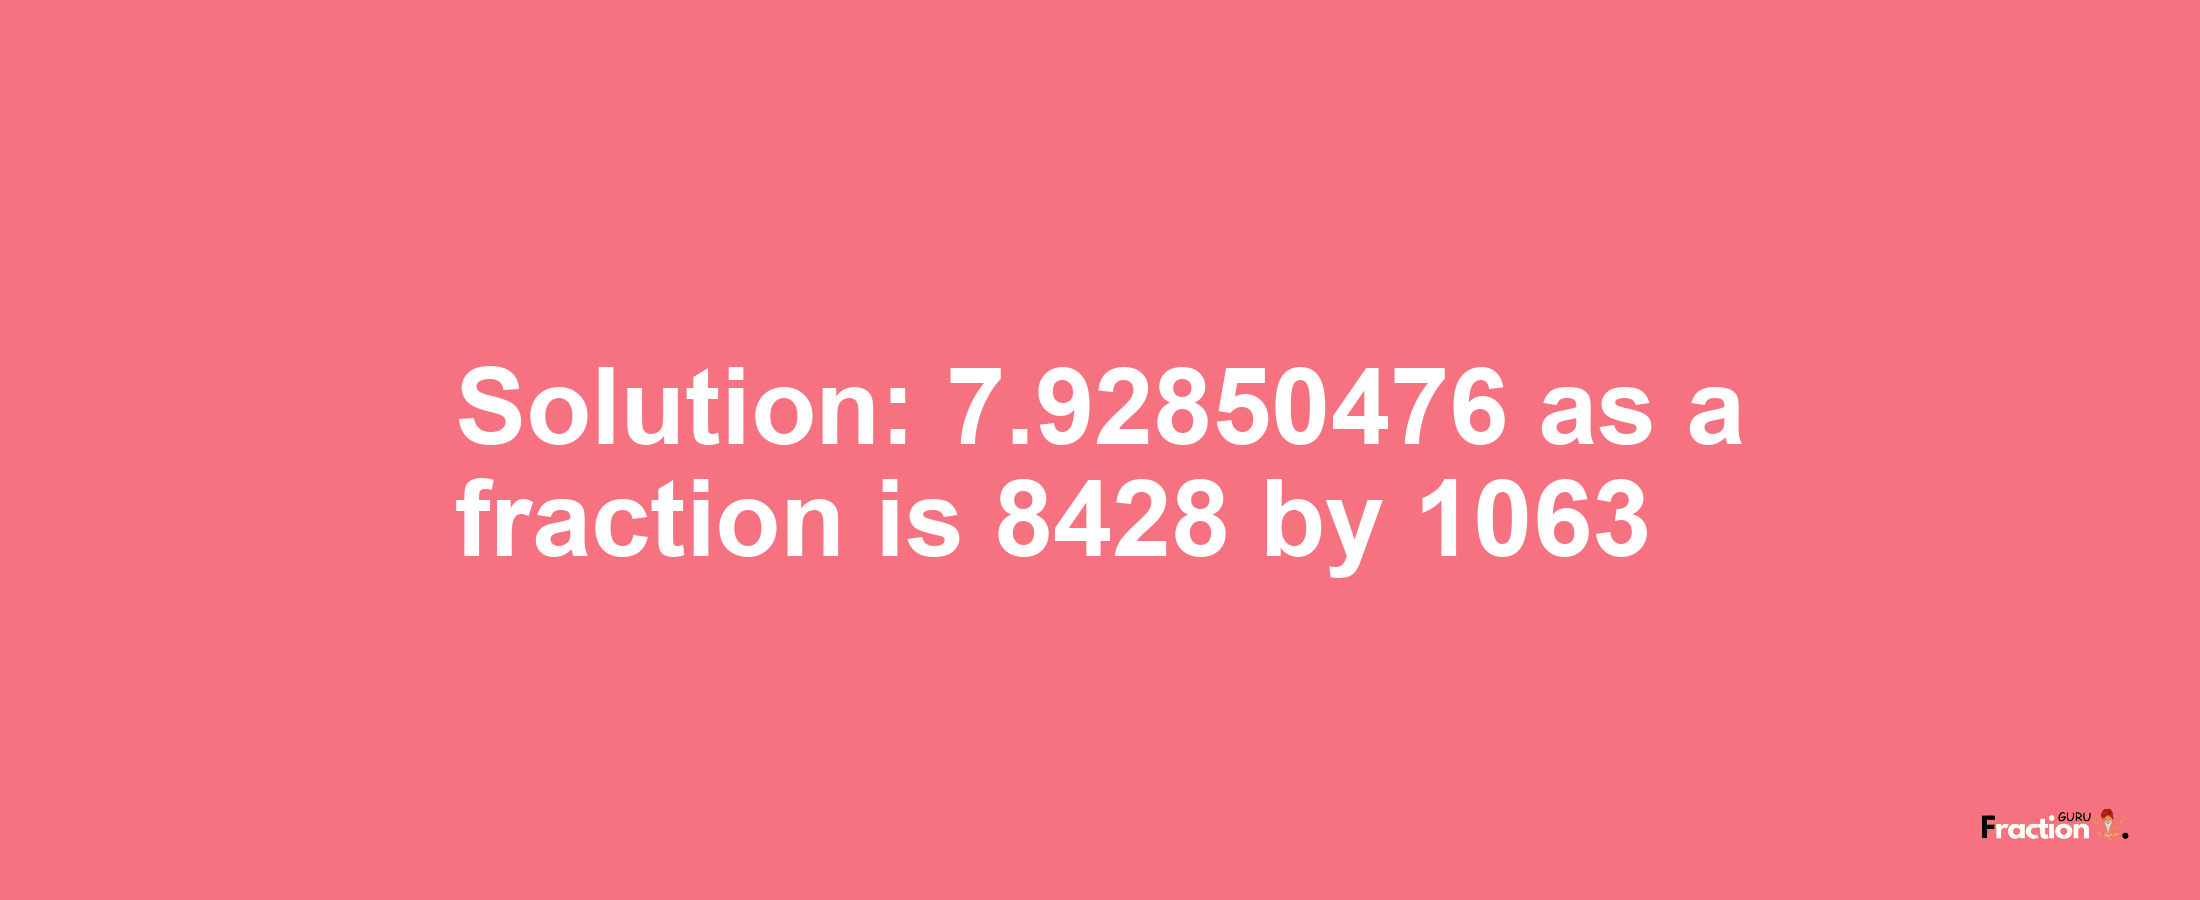 Solution:7.92850476 as a fraction is 8428/1063